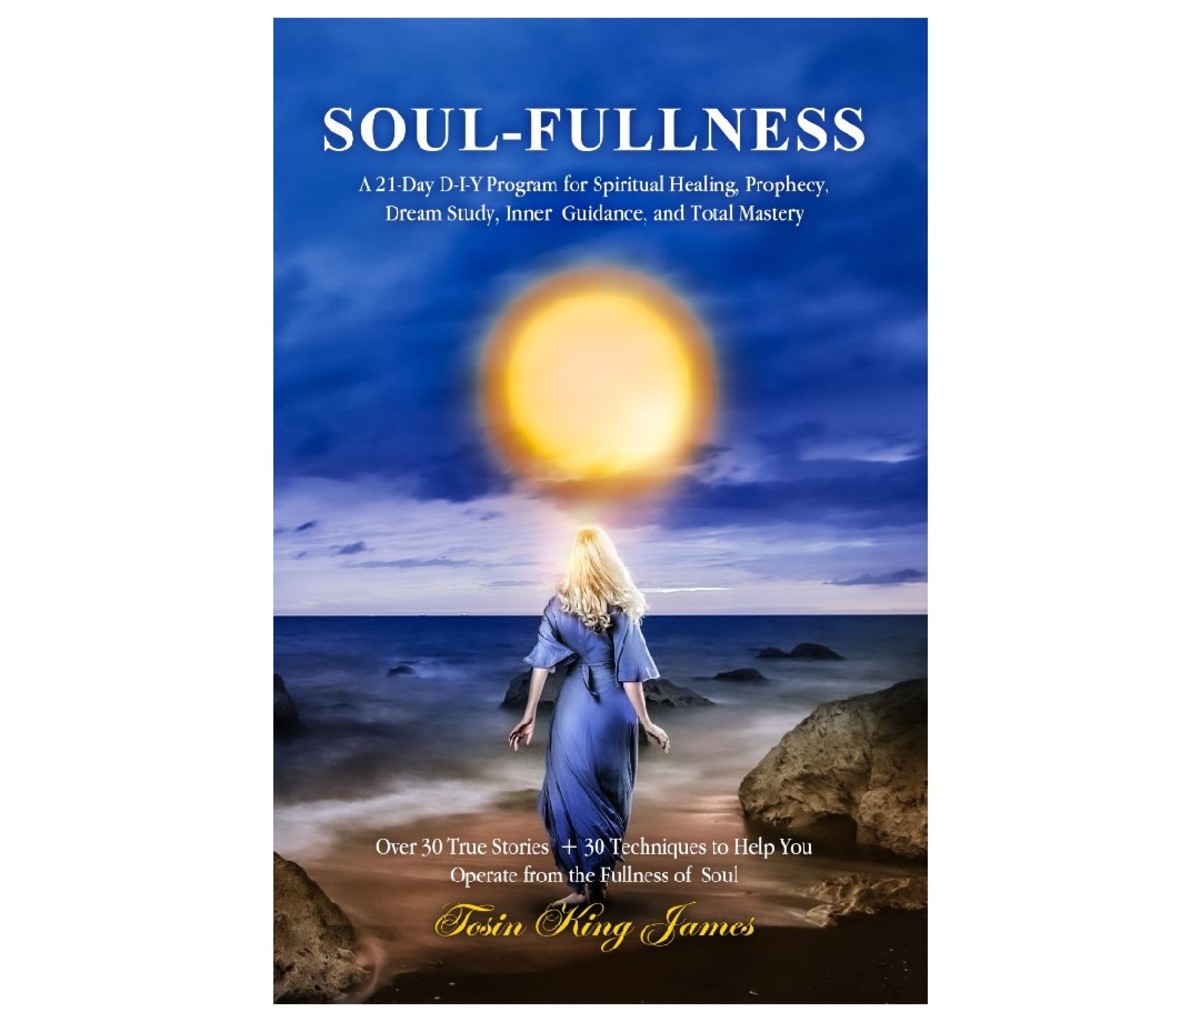 Soul-Fullness, A 21-Day Do-It-Yourself Program for Spiritual Healing, Prophecy, Dream Study, Inner Guidance, and Total Mastery by Tosin King James